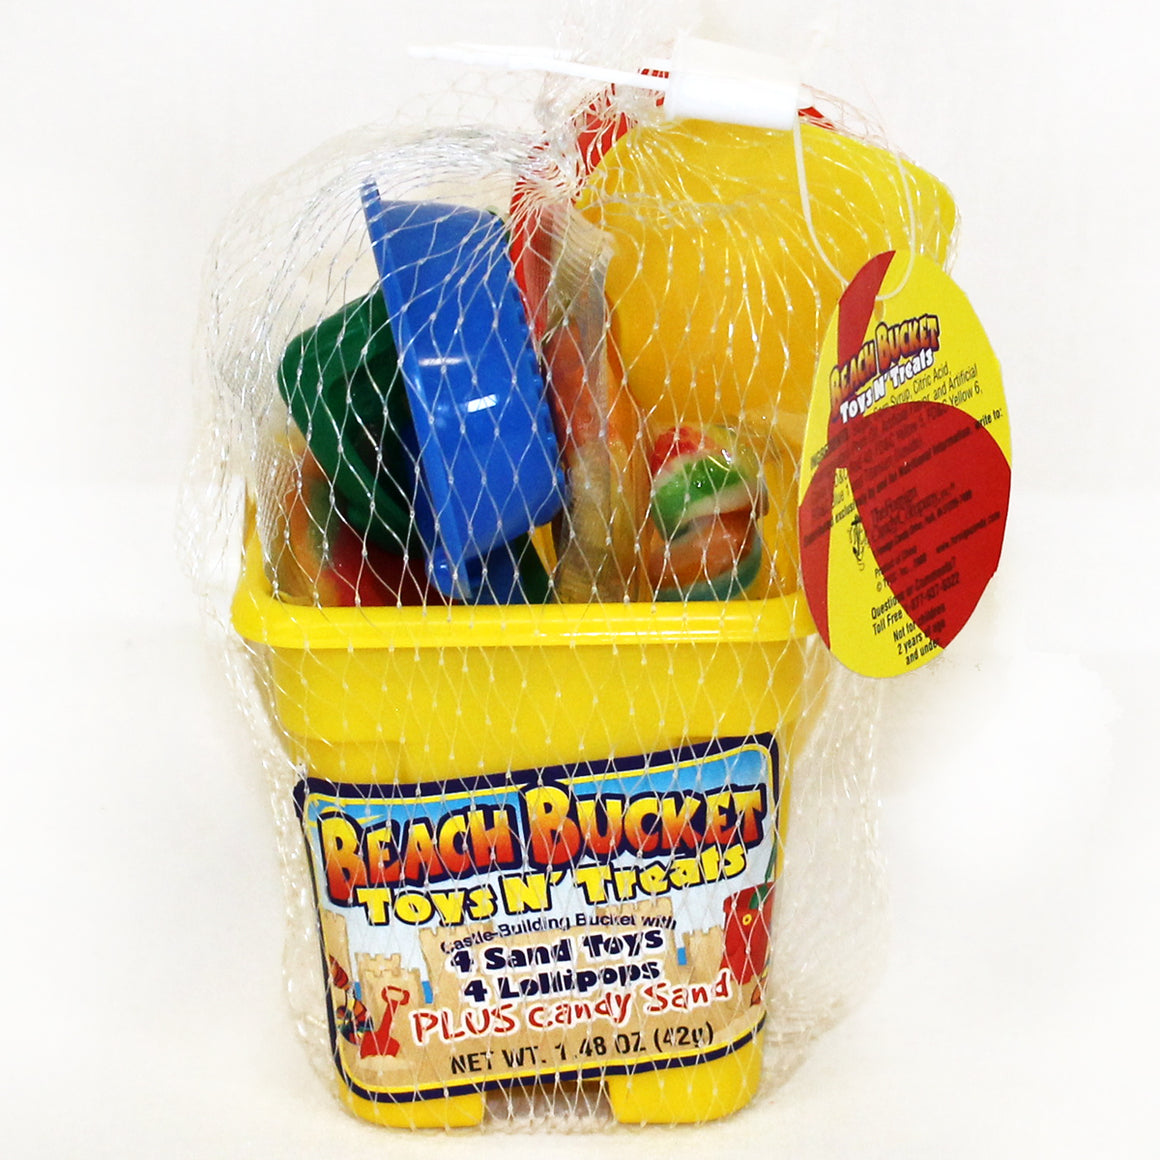 Beach Bucket Toys n' Treats - For fresh candy and great service, visit www.allcitycandy.com